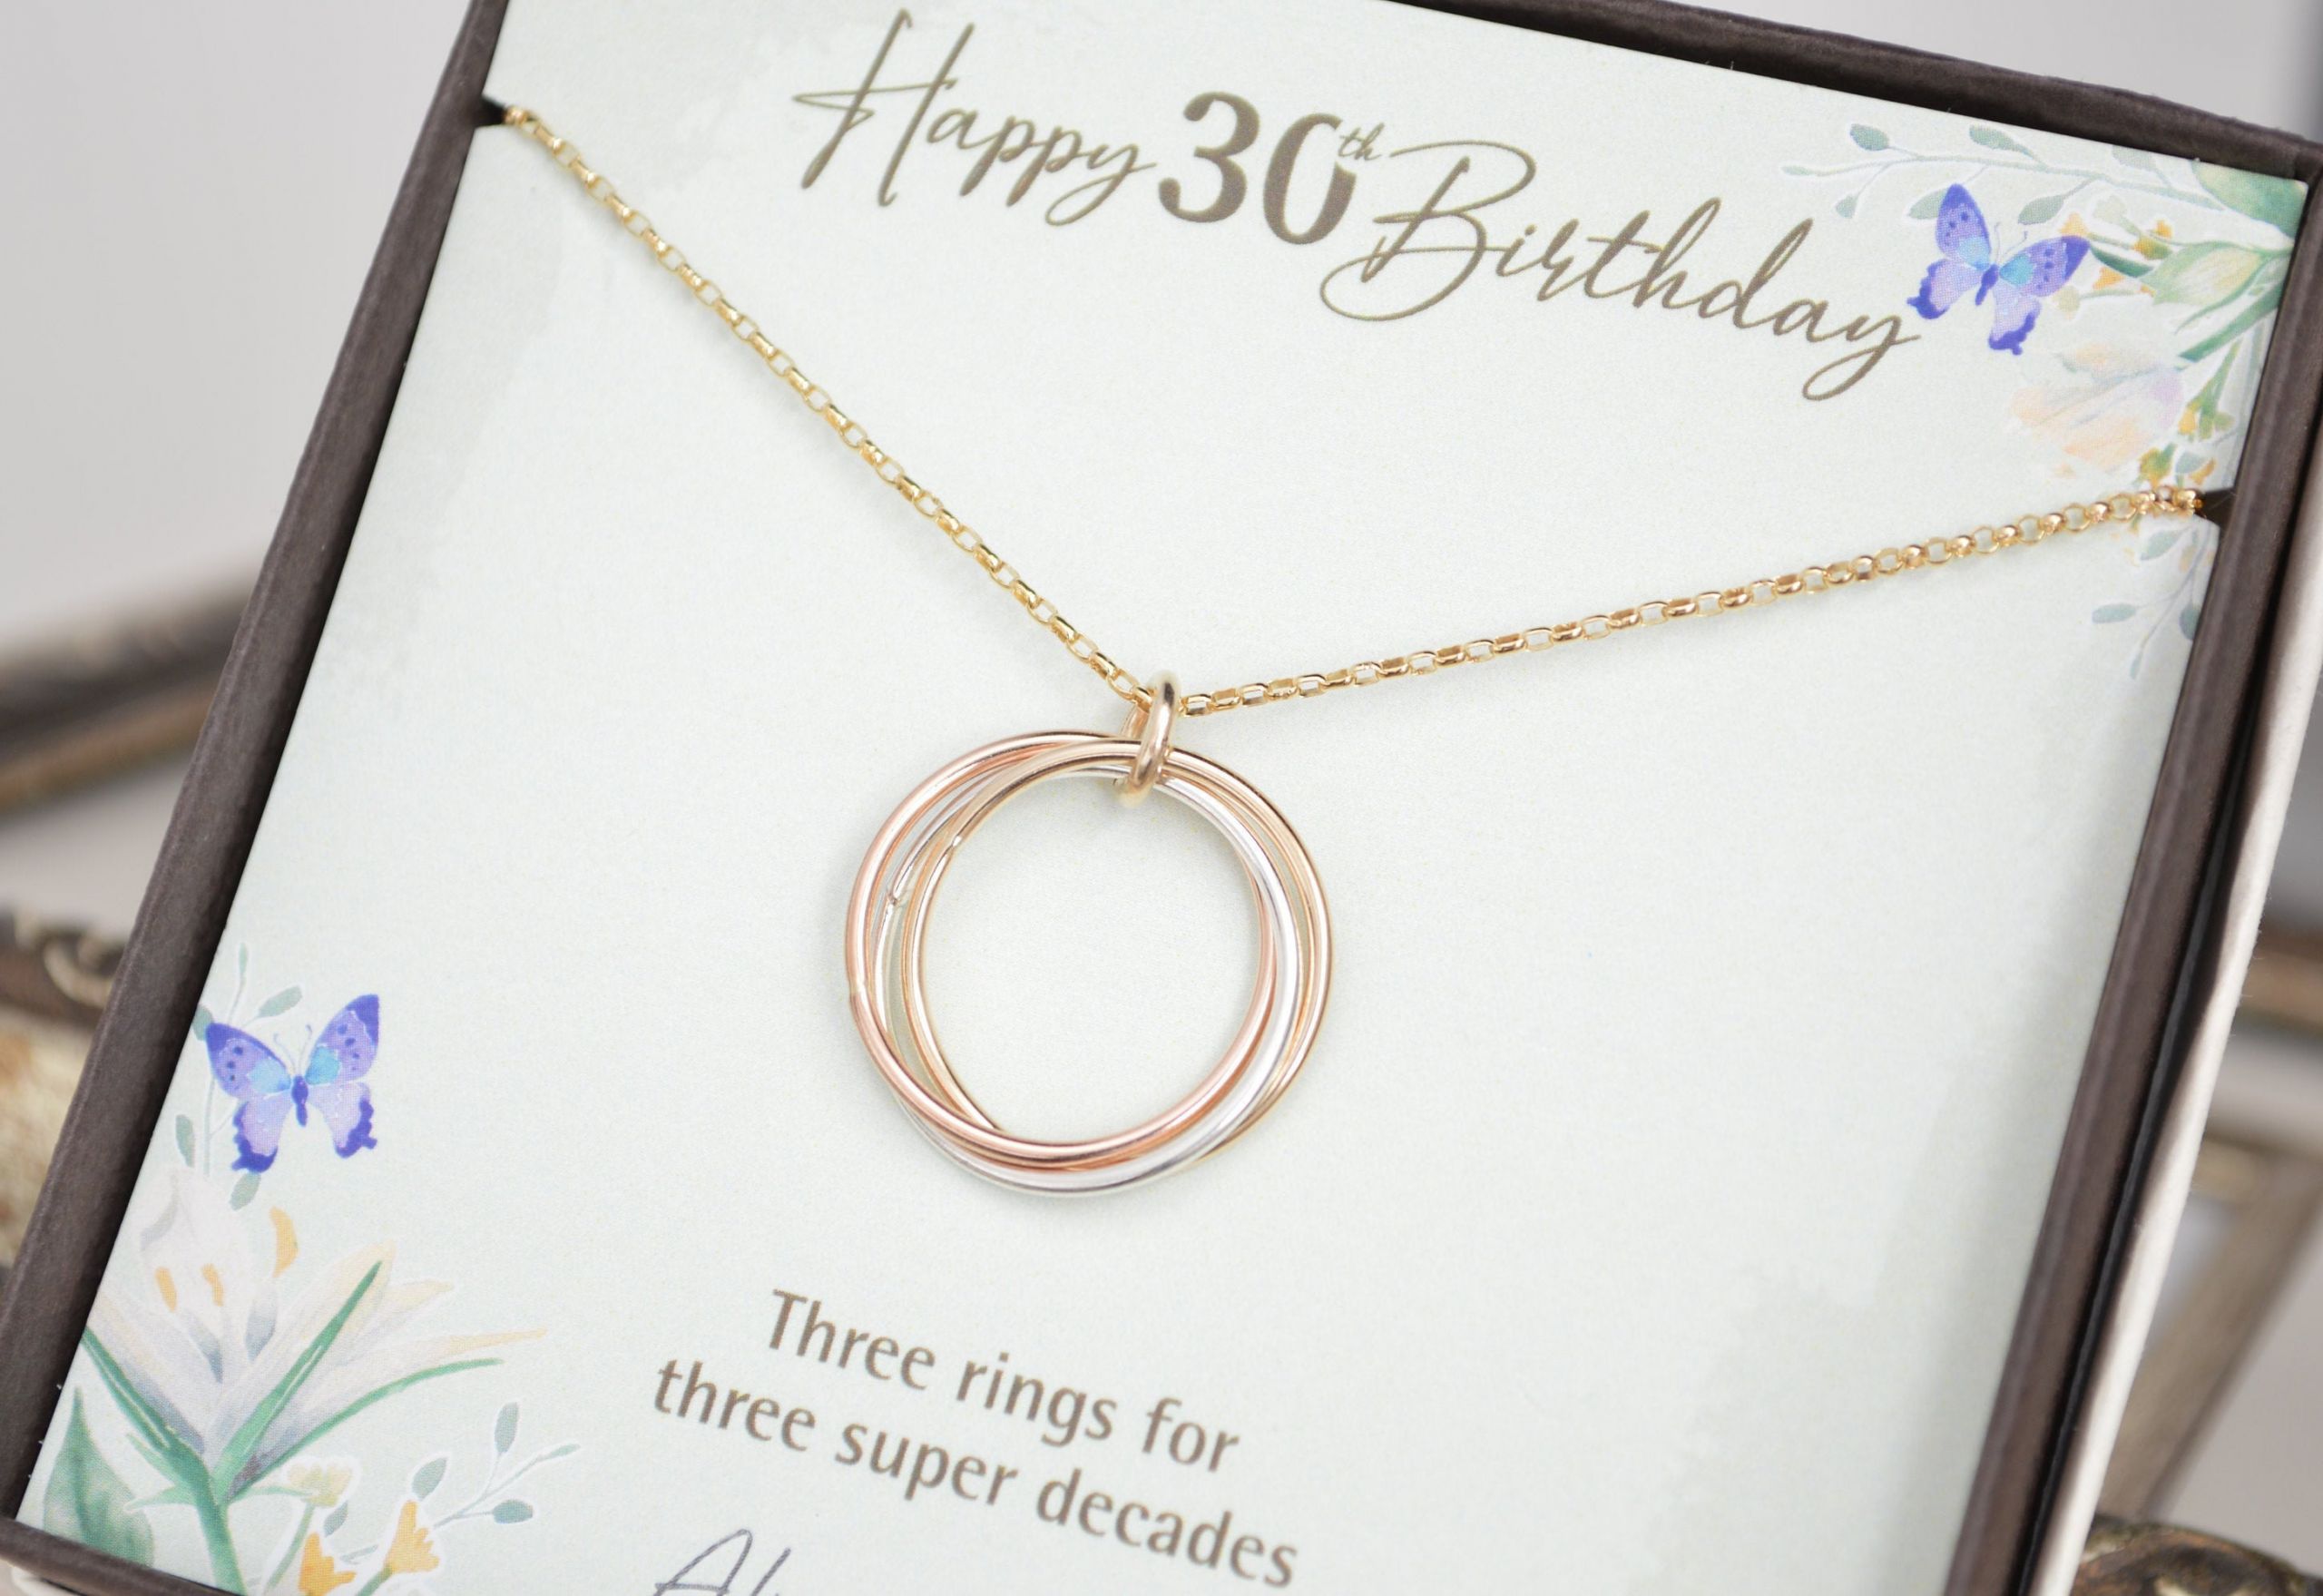 30Th Birthday Gift Ideas For Daughter
 30th Birthday t for daughter 3 Sisters necklace 3